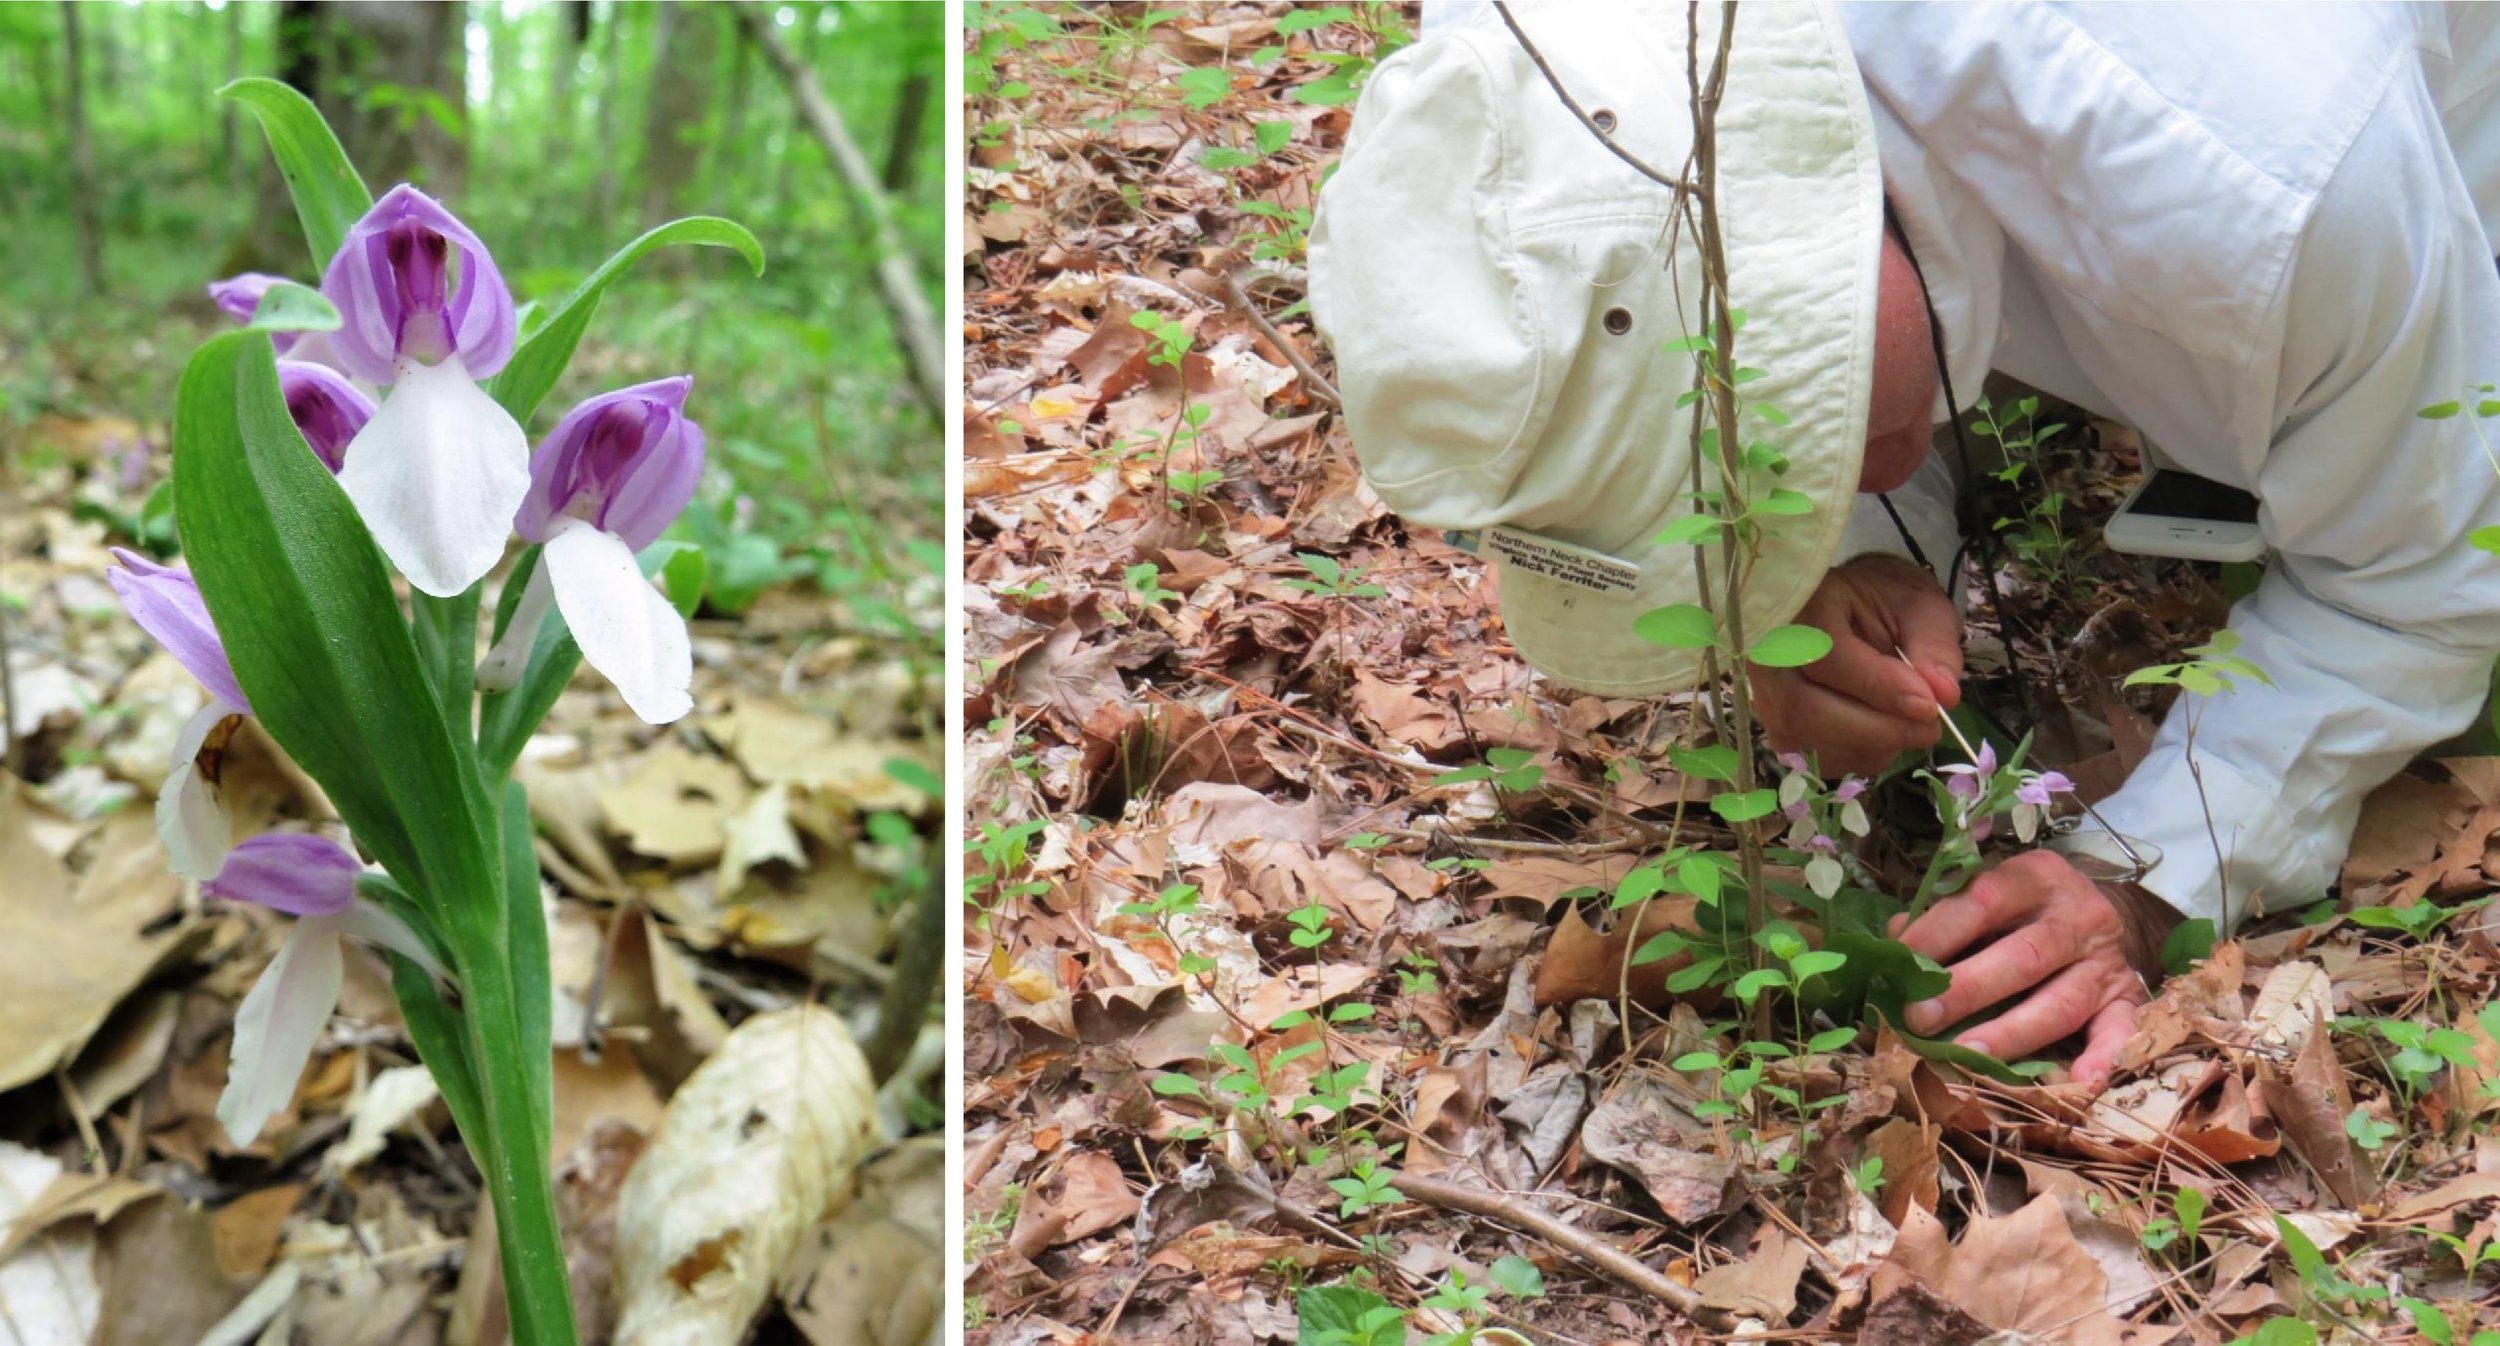 Hundreds of Showy Orchis &amp; Nick Ferriter (NNNPS) pollinating orchids for Smithsonian and ODU researchers